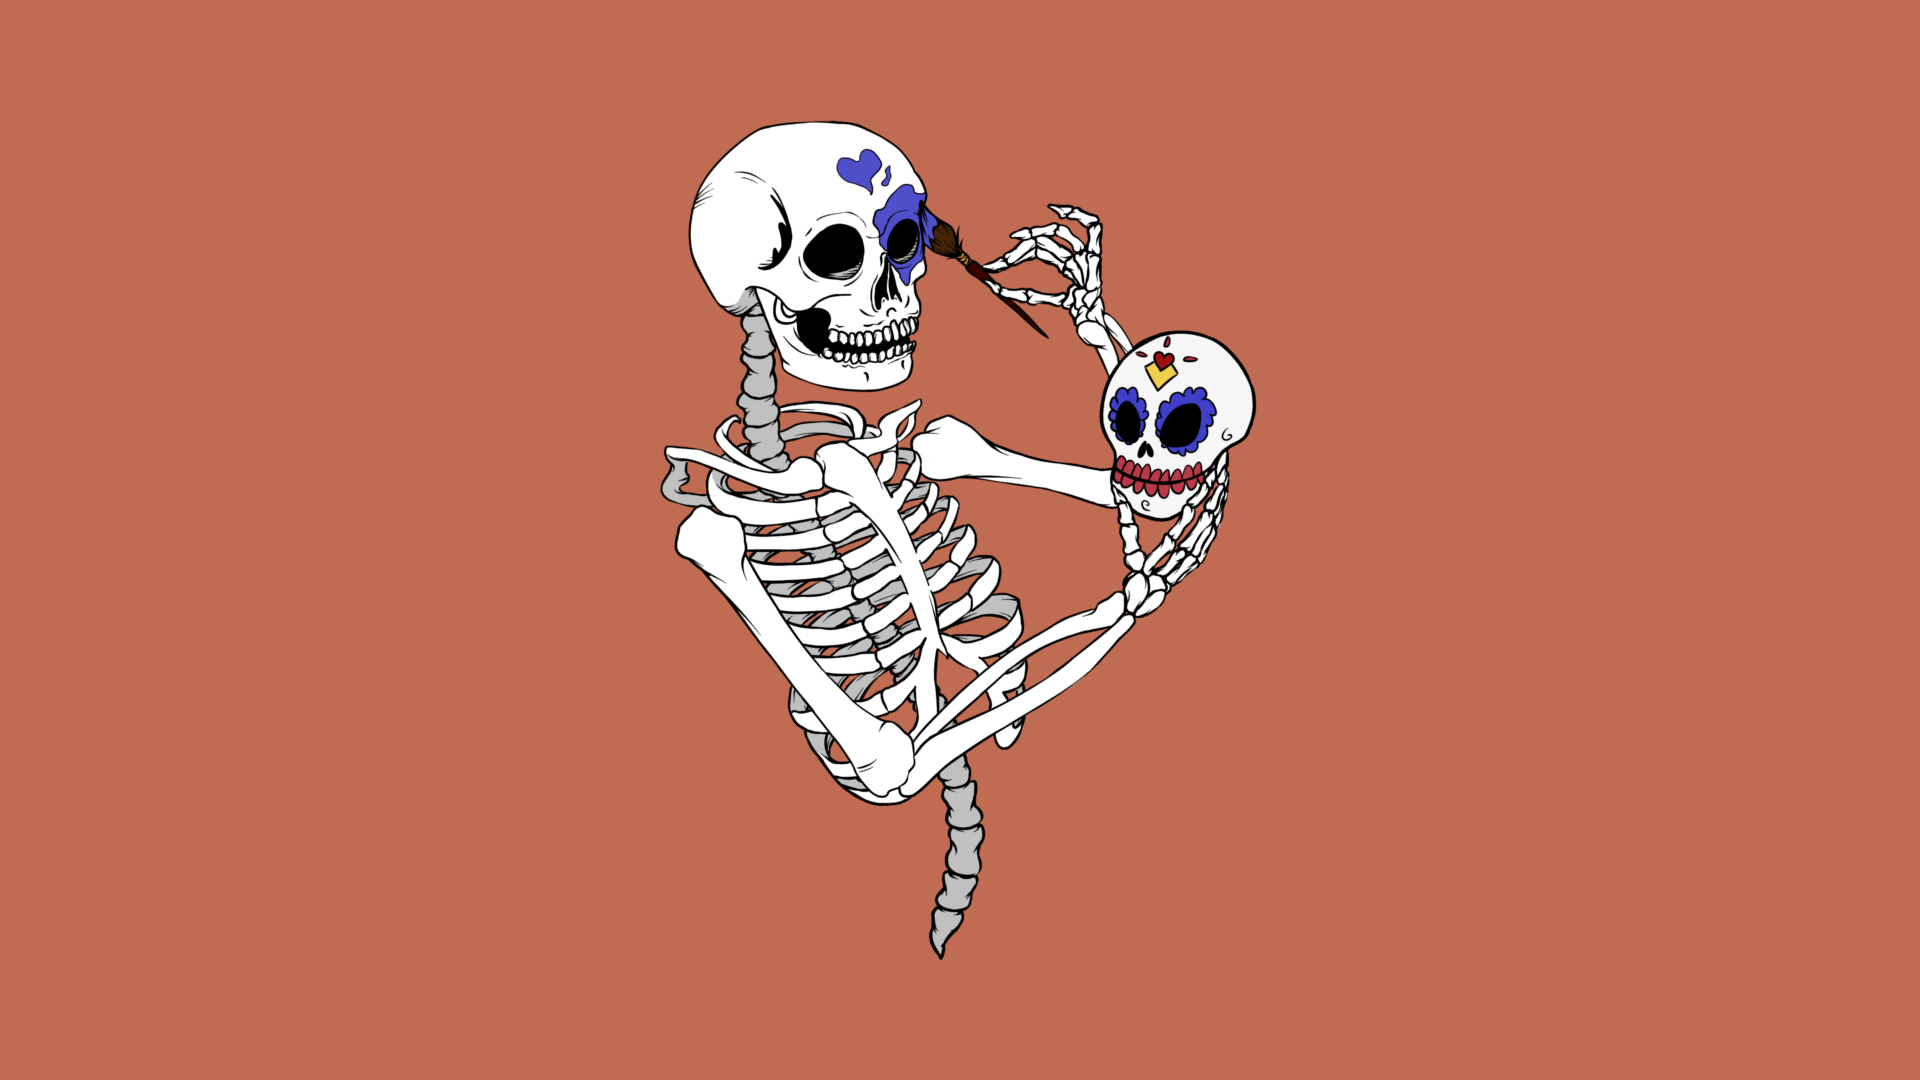 A skeleton is holding an egg in its hand - Skeleton